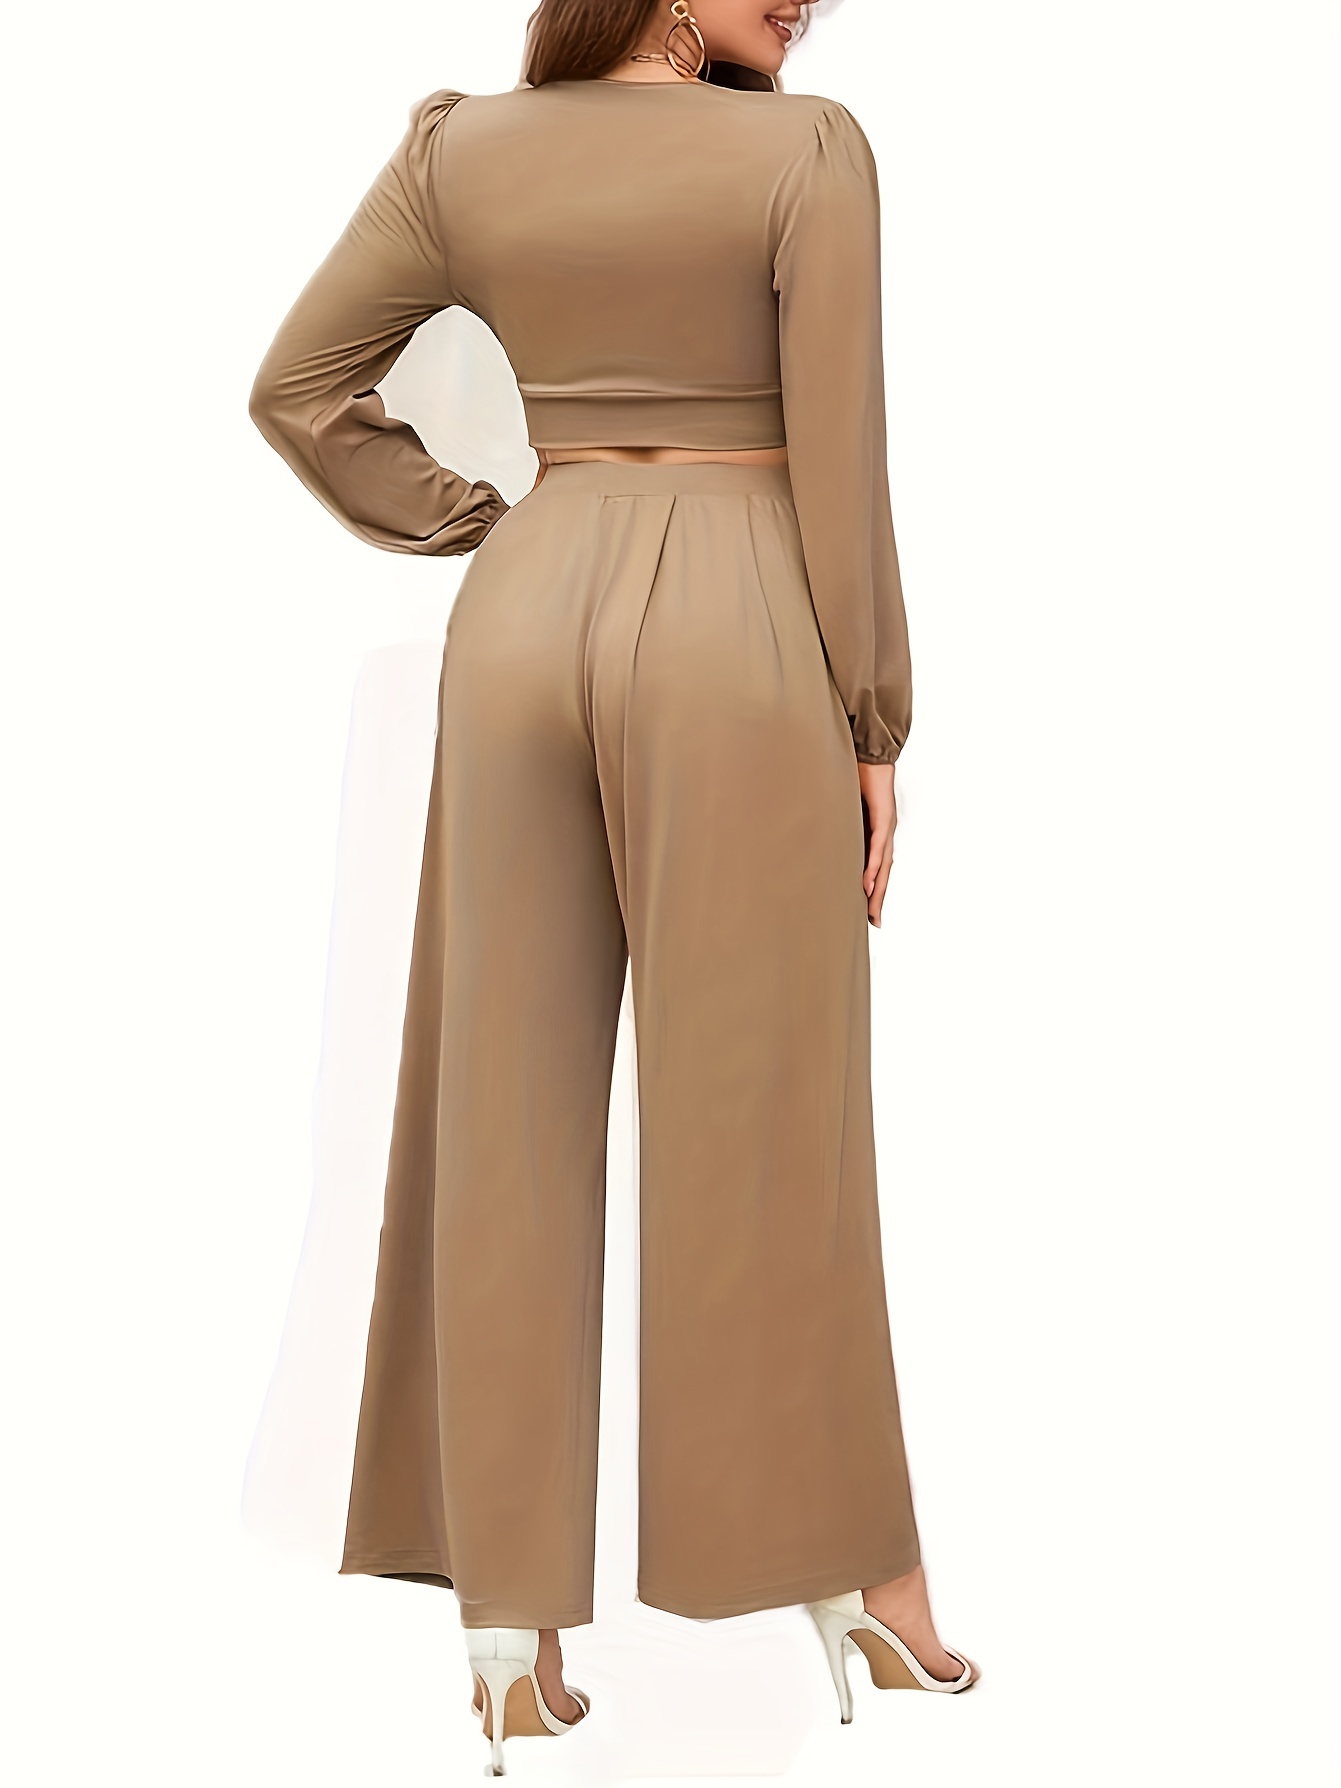 Women's Clothing :: V-NECK TOP HIGH-WAISTED WIDE-LEG PANT SUIT